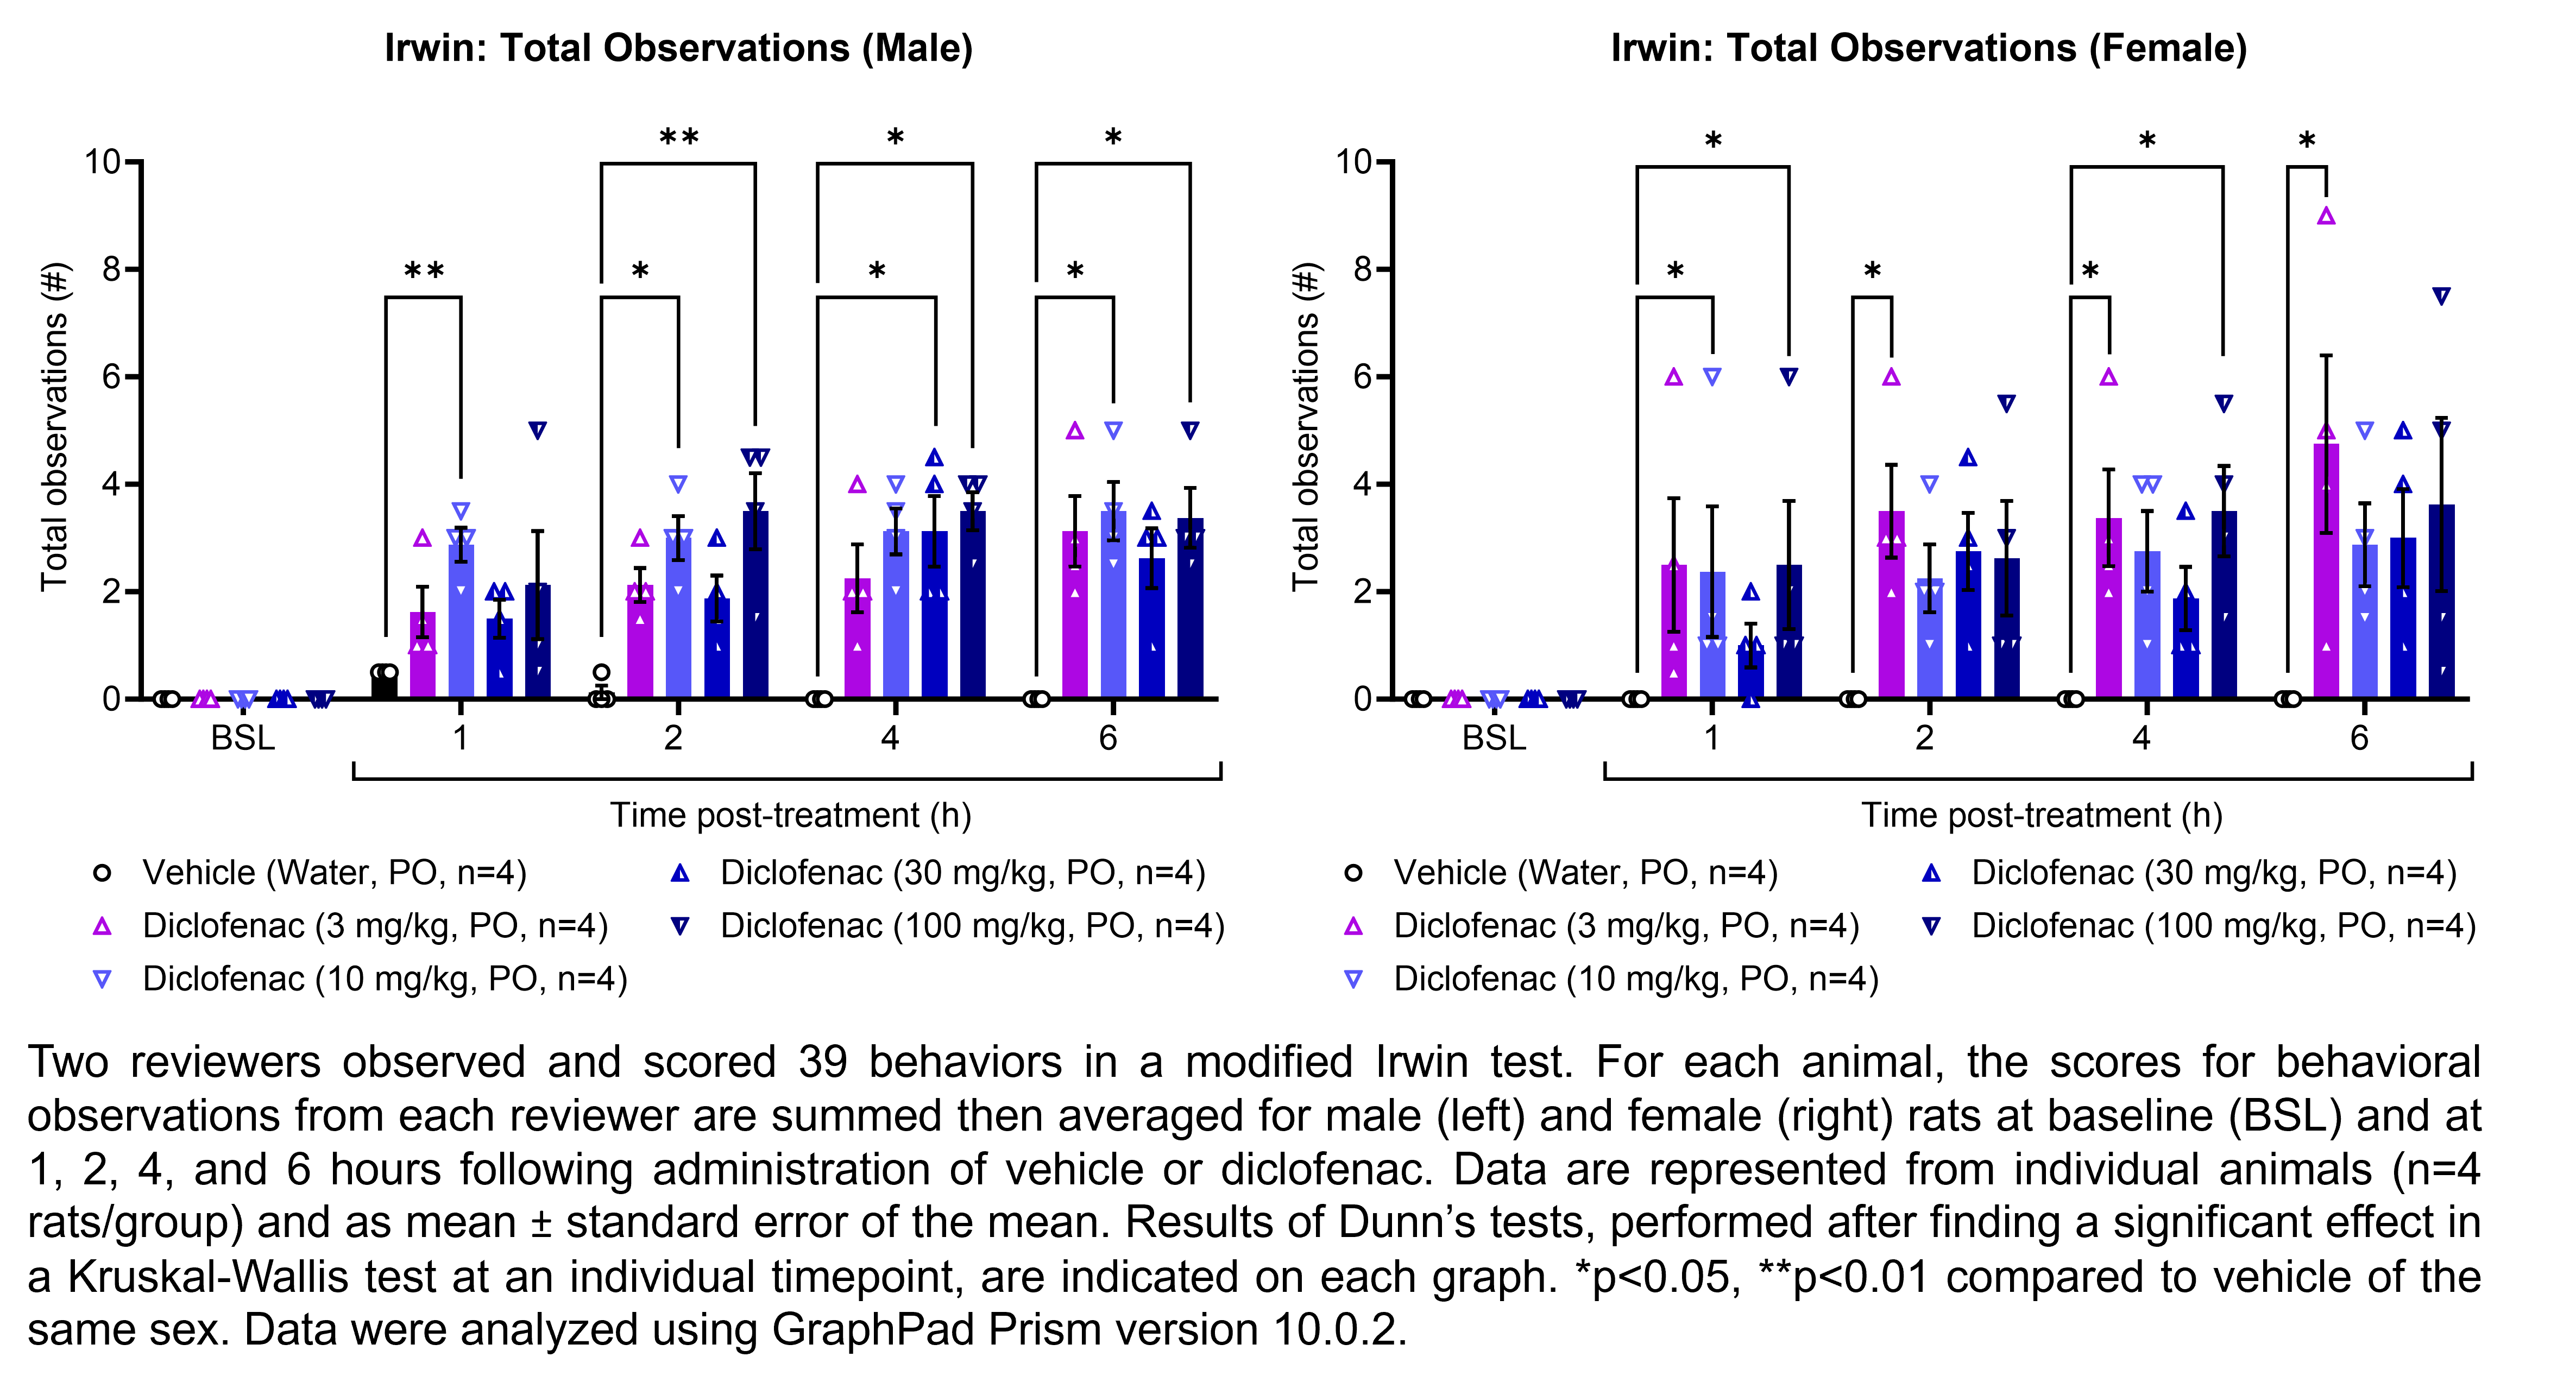 Two reviewers observed and scored 39 behaviors in a modified Irwin test. For each animal, the scores for behavioral observations from each reviewer are summed then averaged for male and female rats (shown on two graphs). Responses are shown at the following time points: baseline (before treatment) and at 1, 2, 4, and 6 hours after treatment with vehicle (water, delivered PO) or diclofenac (3, 10, 30, or 100 mg/kg, delivered PO). There were 4 rats per group. Kruskal-Wallis tests were performed at each timepoint for each sex, followed by Dunn’s tests when a significant effect was observed. Dunn’s tests found an increase in the number of observations relative to vehicle in males at 1 hour post-treatment with 10 mg/kg diclofenac (p<0.01), at 2 hours post-treatment with 10 mg/kg diclofenac (p<0.05) and 100 mg/kg diclofenac (p<0.01), at 4 hours post-treatment with 30 mg/kg diclofenac (p<0.05) and 100 mg/kg diclofenac (p<0.05), and at 6 hours post-treatment with 10 mg/kg diclofenac (p<0.05) and 100 mg/kg diclofenac (p<0.05). Dunn’s tests found an increase in the number of observations relative to vehicle in females at 1 hour post-treatment with 10 mg/kg diclofenac (p<0.05) and 100 mg/kg diclofenac (p<0.05), at 2 hours post-treatment with 3 mg/kg diclofenac (p<0.05), at 4 hours post-treatment with 3 mg/kg diclofenac (p<0.05) and 100 mg/kg diclofenac (p<0.05), and at 6 hours post-treatment with 3 mg/kg diclofenac (p<0.05). Data were analyzed using GraphPad Prism version 10.0.2